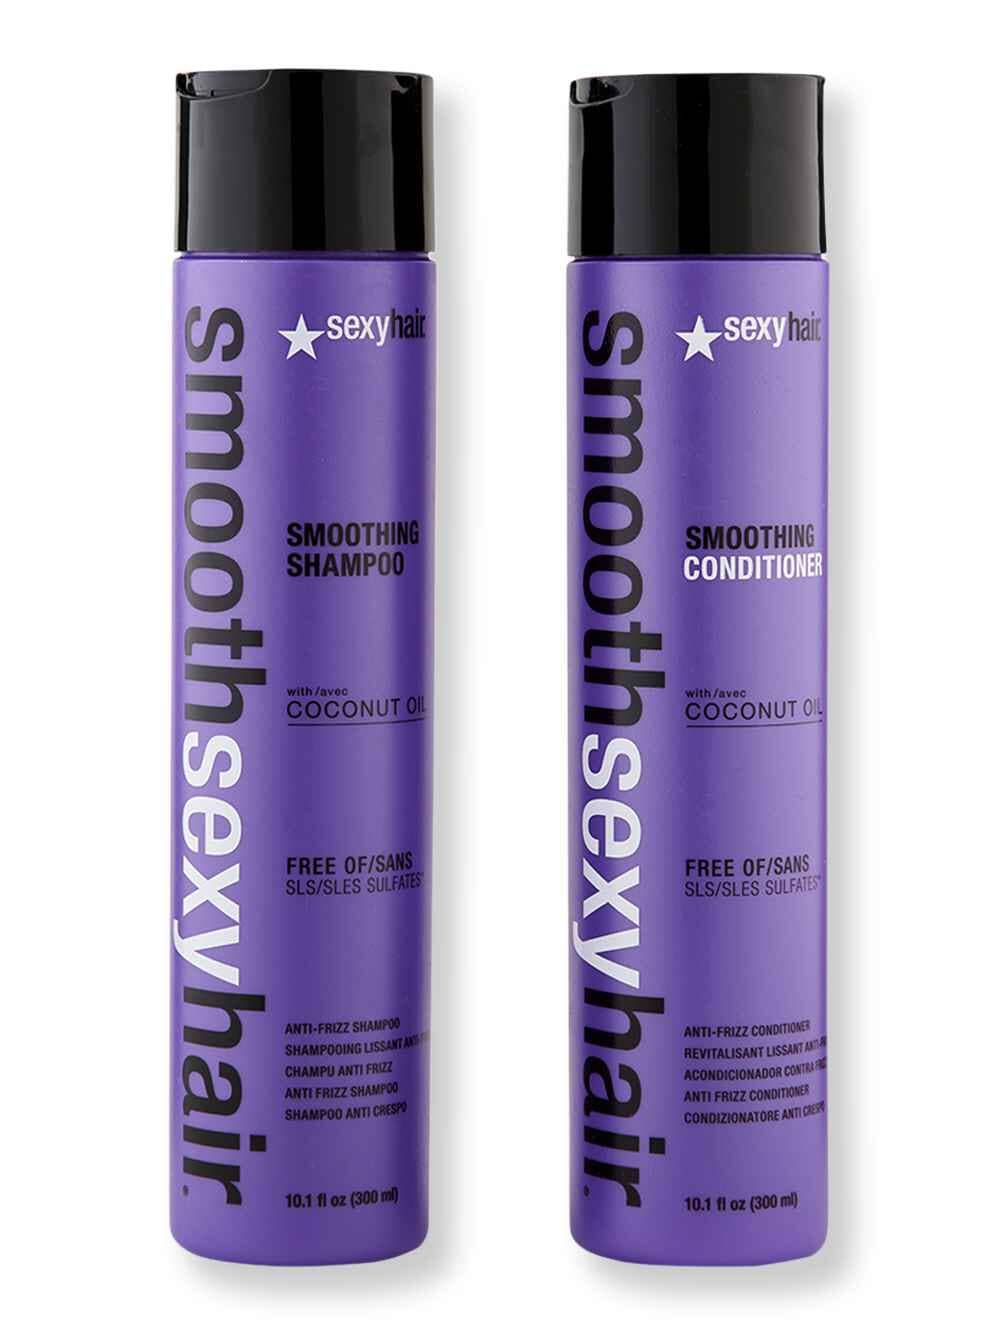 Sexy Hair Sexy Hair Smooth Sexy Hair Smoothing Shampoo & Conditioner 10.1 oz Hair Care Value Sets 